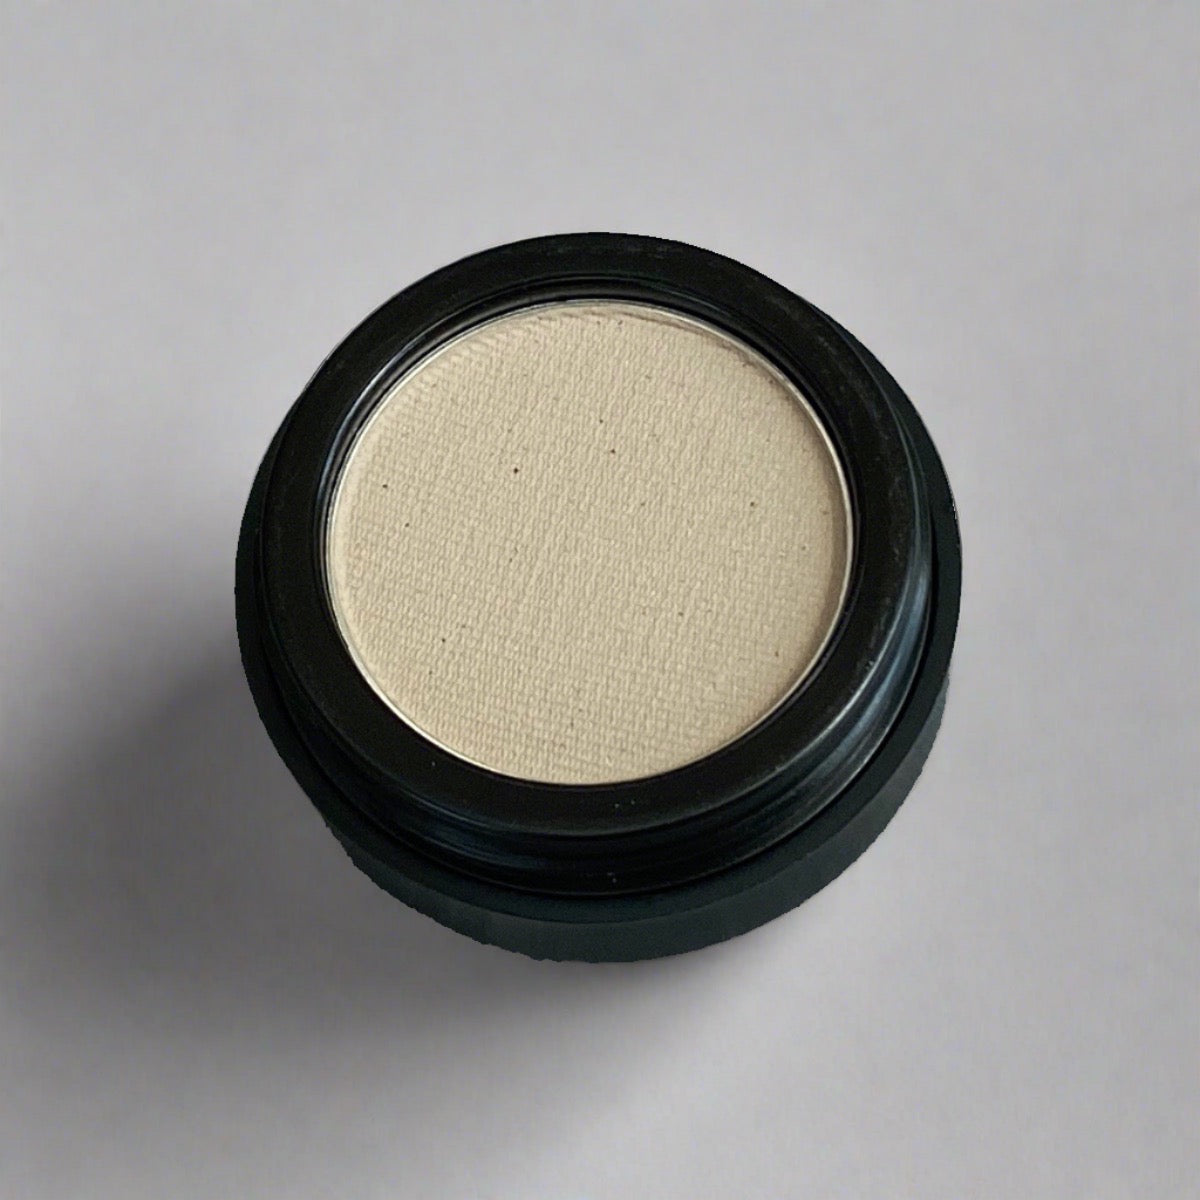 3-in-1 contour/highlighter wet/dry Nearly Beige Eyeshadow